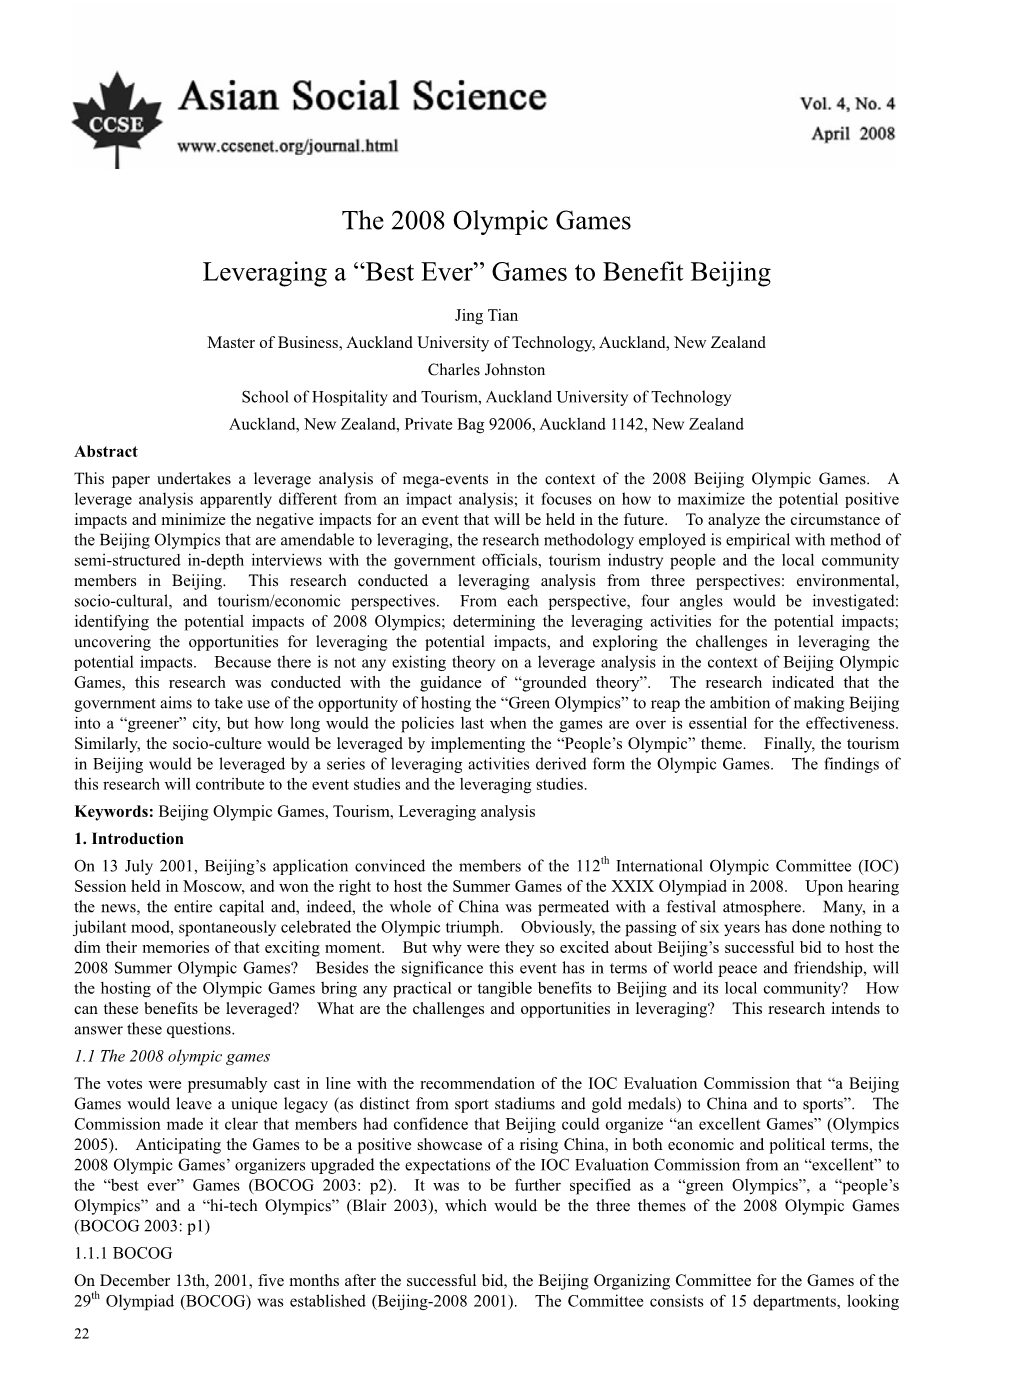 The 2008 Olympic Games Leveraging a “Best Ever” Games to Benefit Beijing